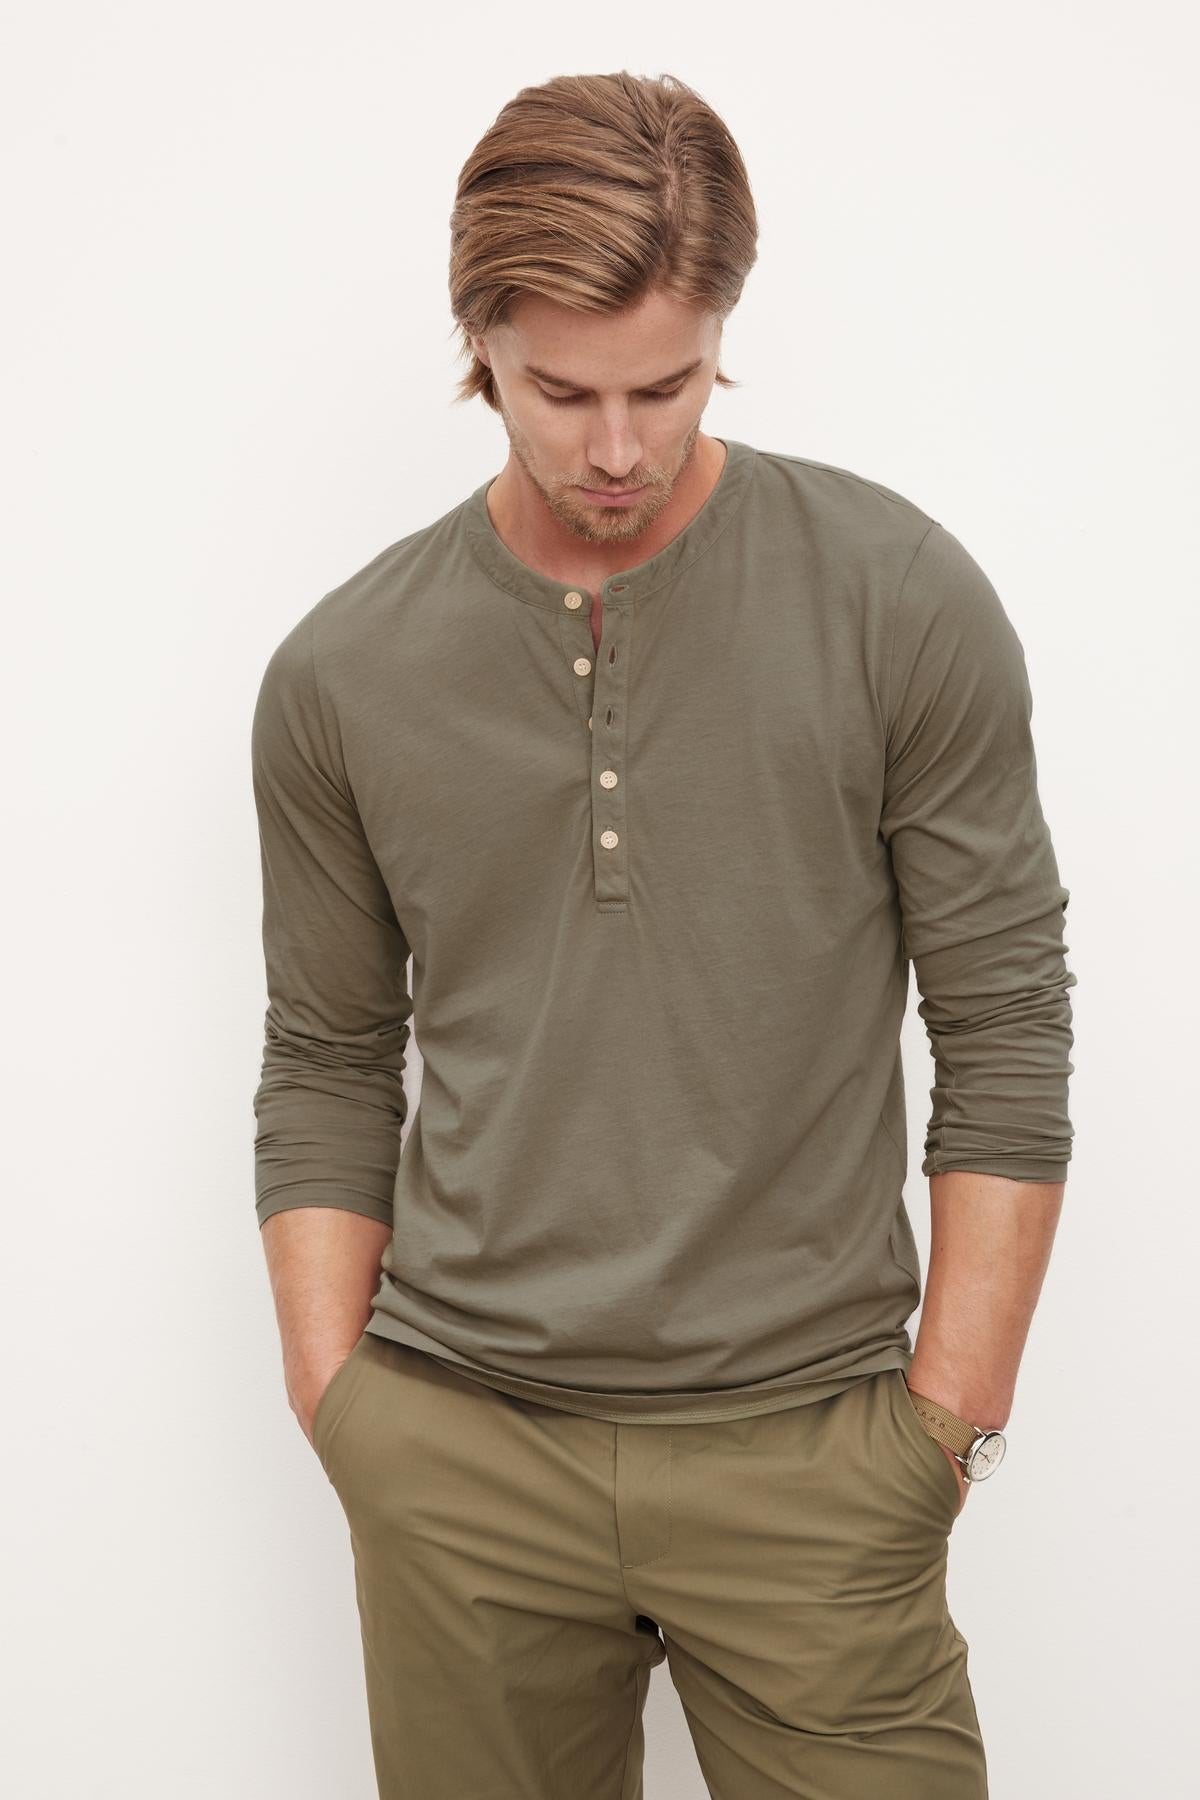   A man with light brown hair stands with hands in his pockets, looking down, wearing an olive green long-sleeve ALVARO HENLEY by Velvet by Graham & Spencer crafted from whisper knit material and matching pants against a plain white background. 